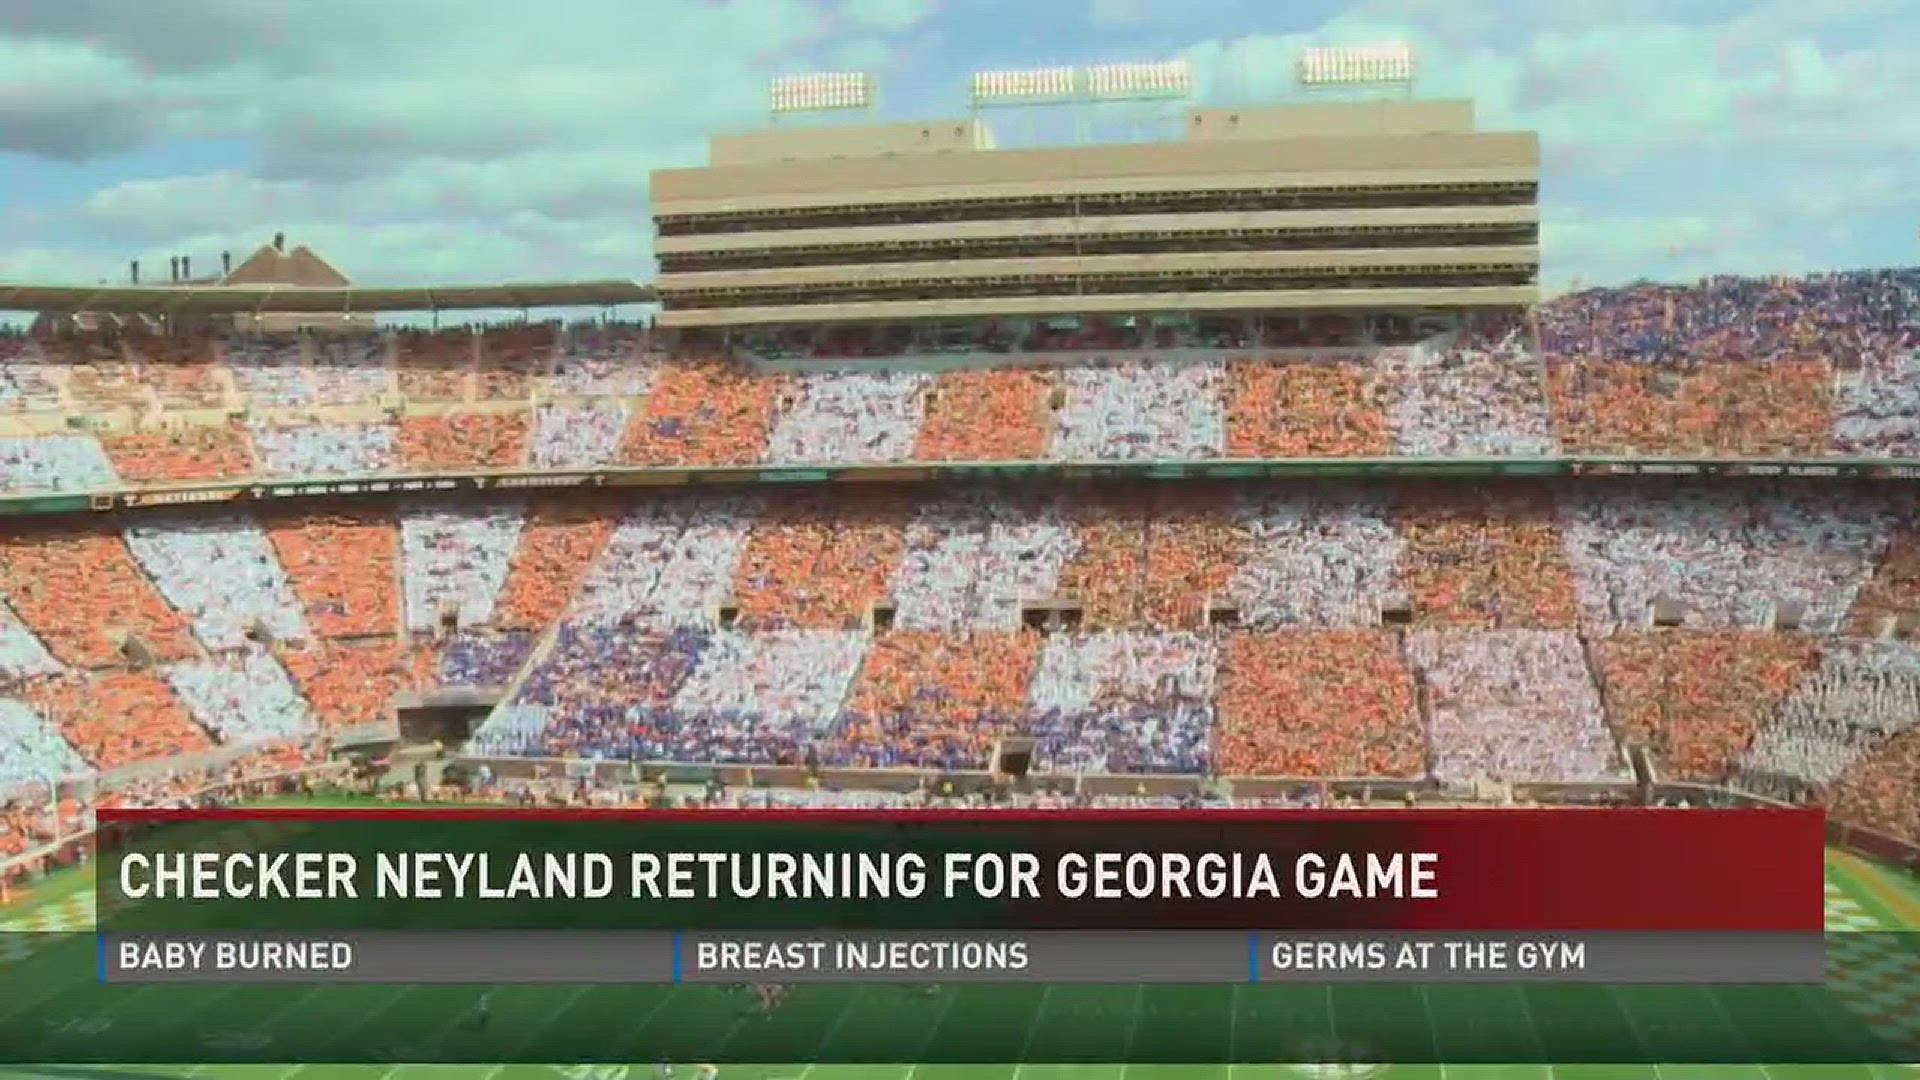 Sept. 25, 2017: Vols fans will checker Neyland for the upcoming Georgia game.